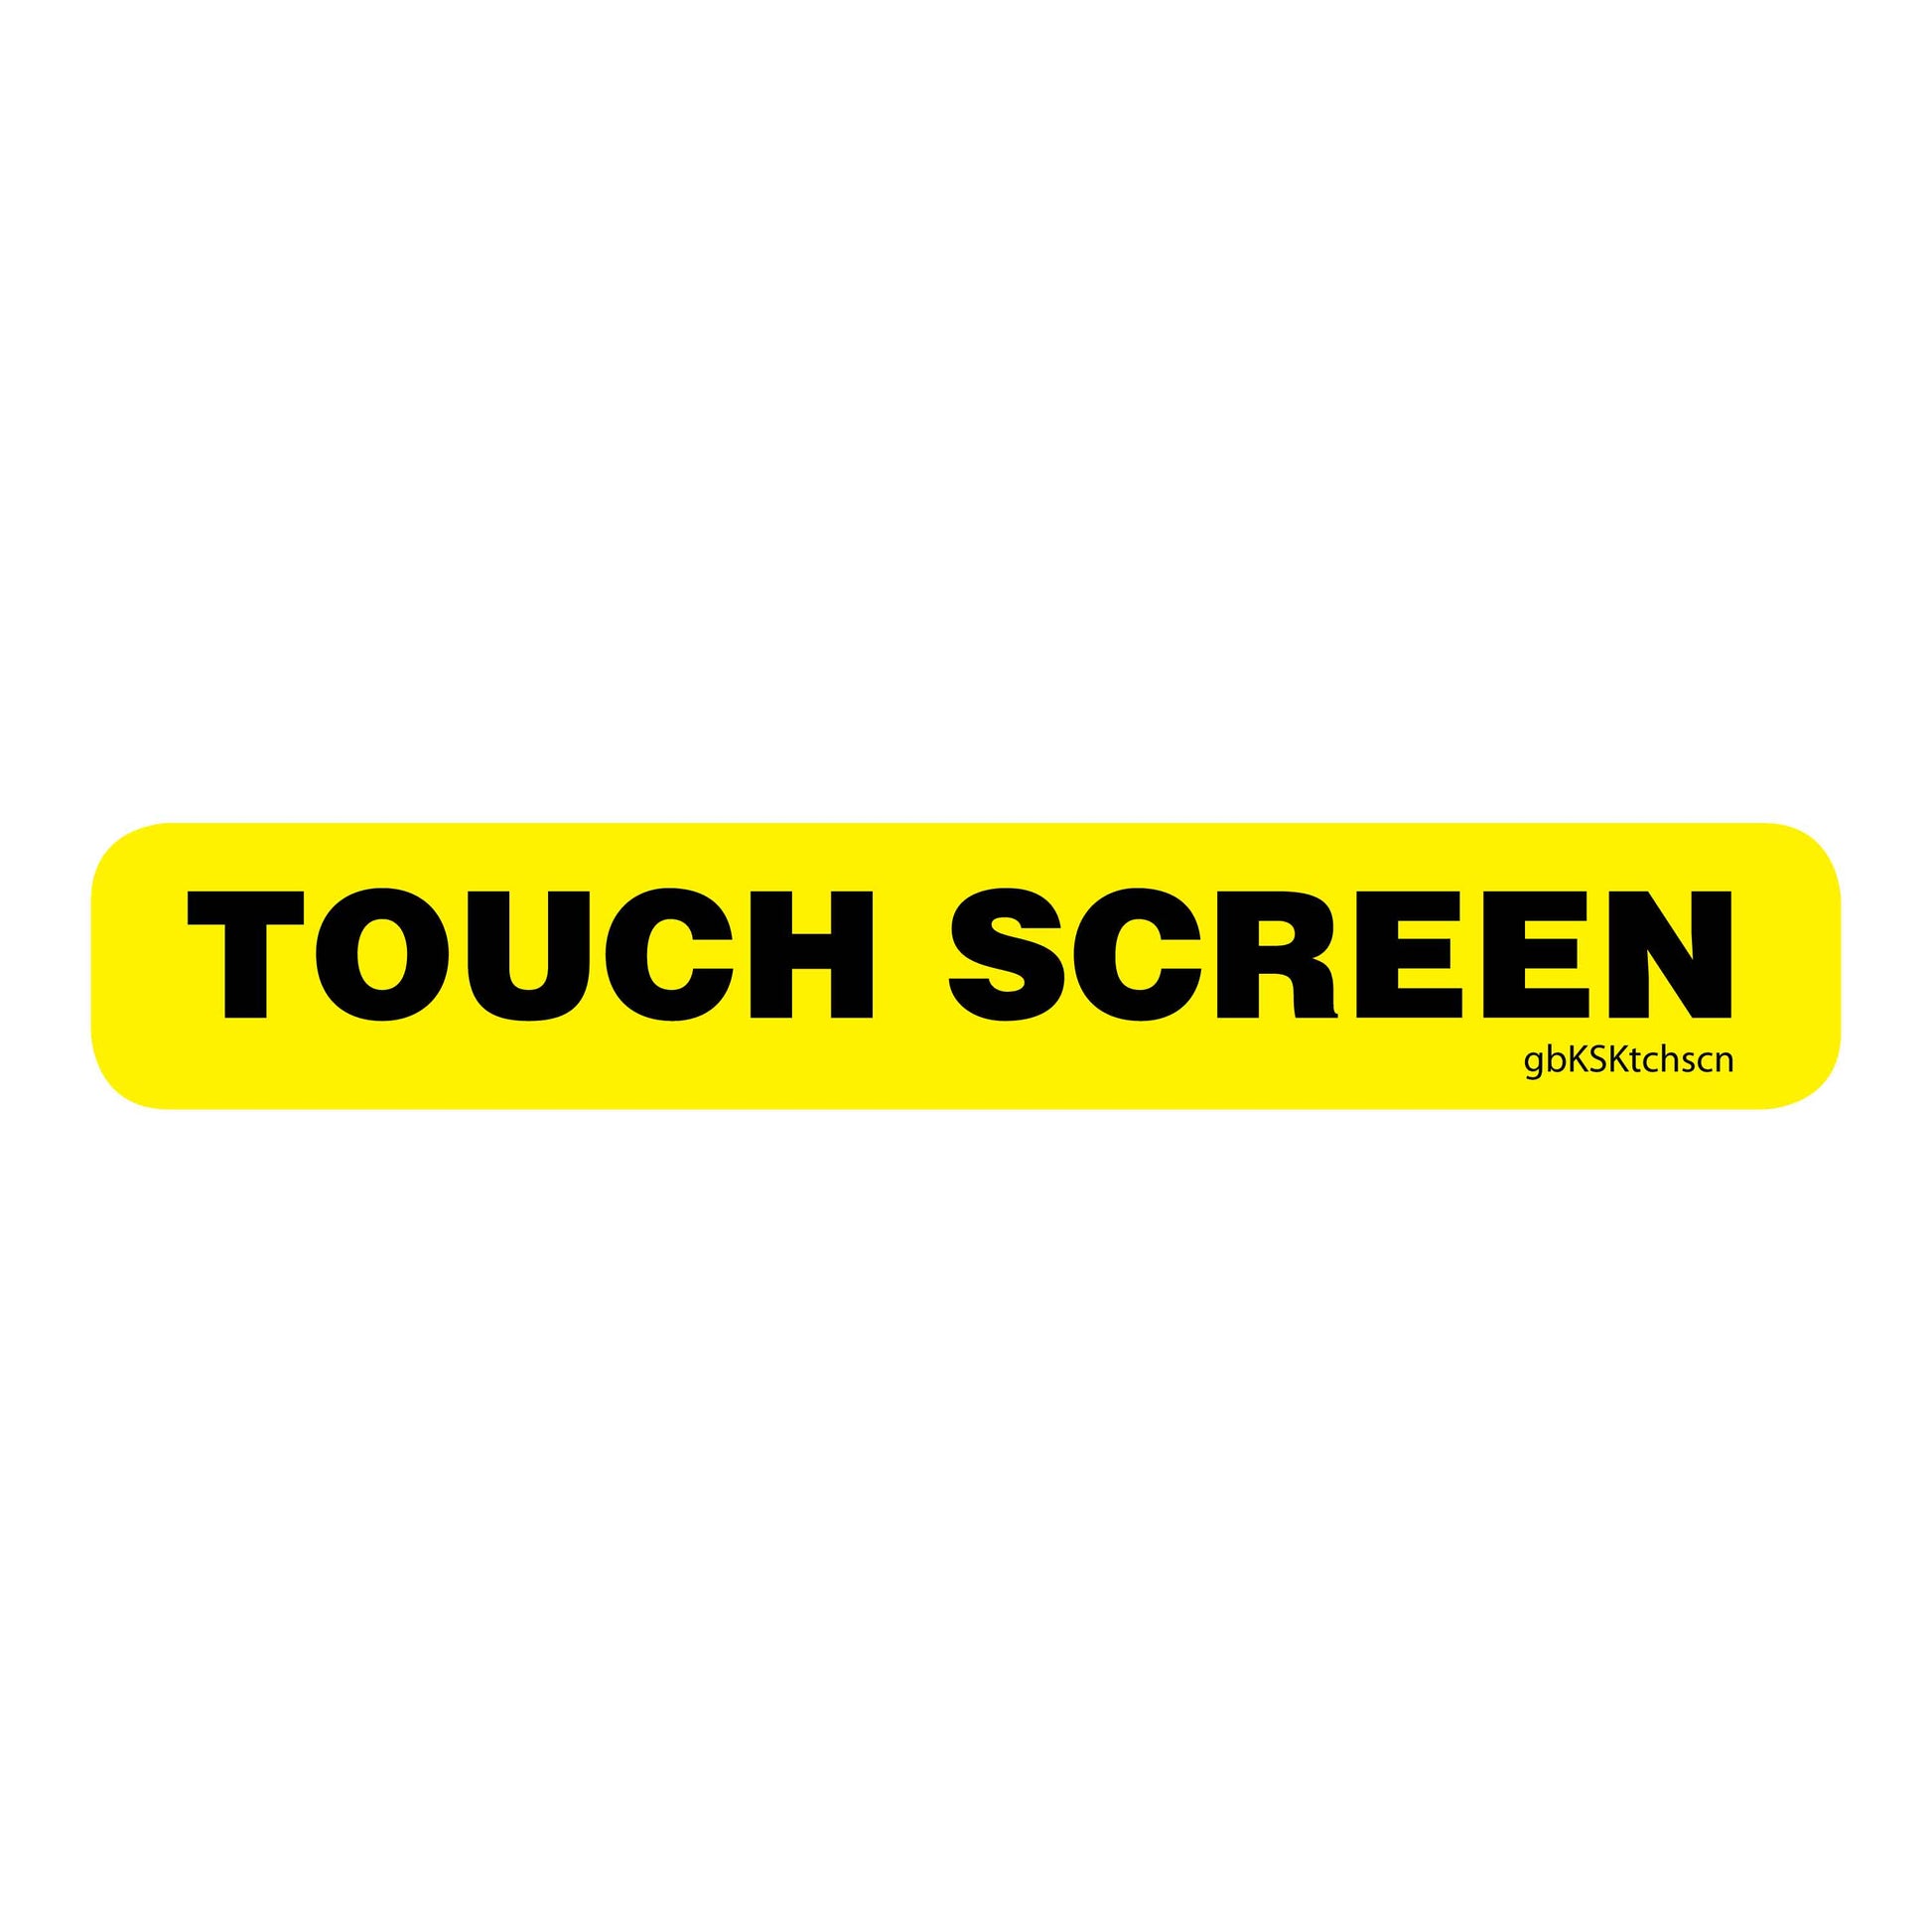 Touch Screen Decal. 3 inches by 5 inches in size. 